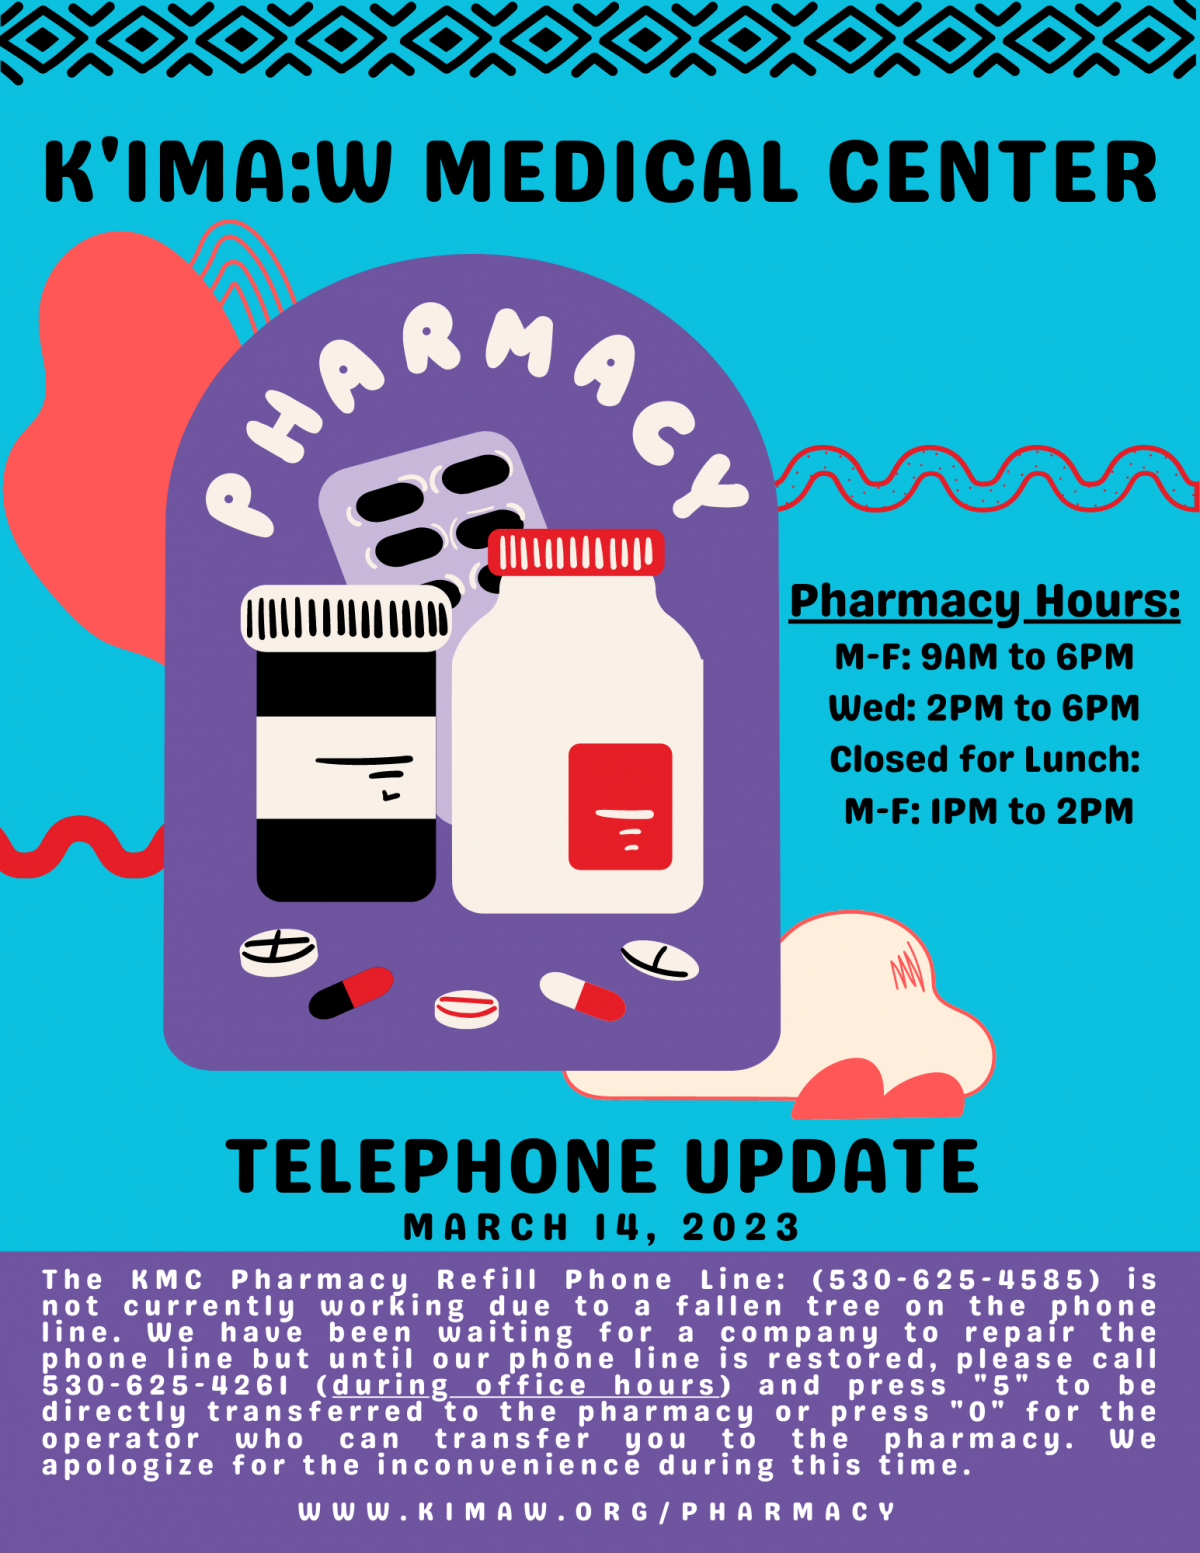 KMC Pharmacy Telephone Update for March 143, 2023